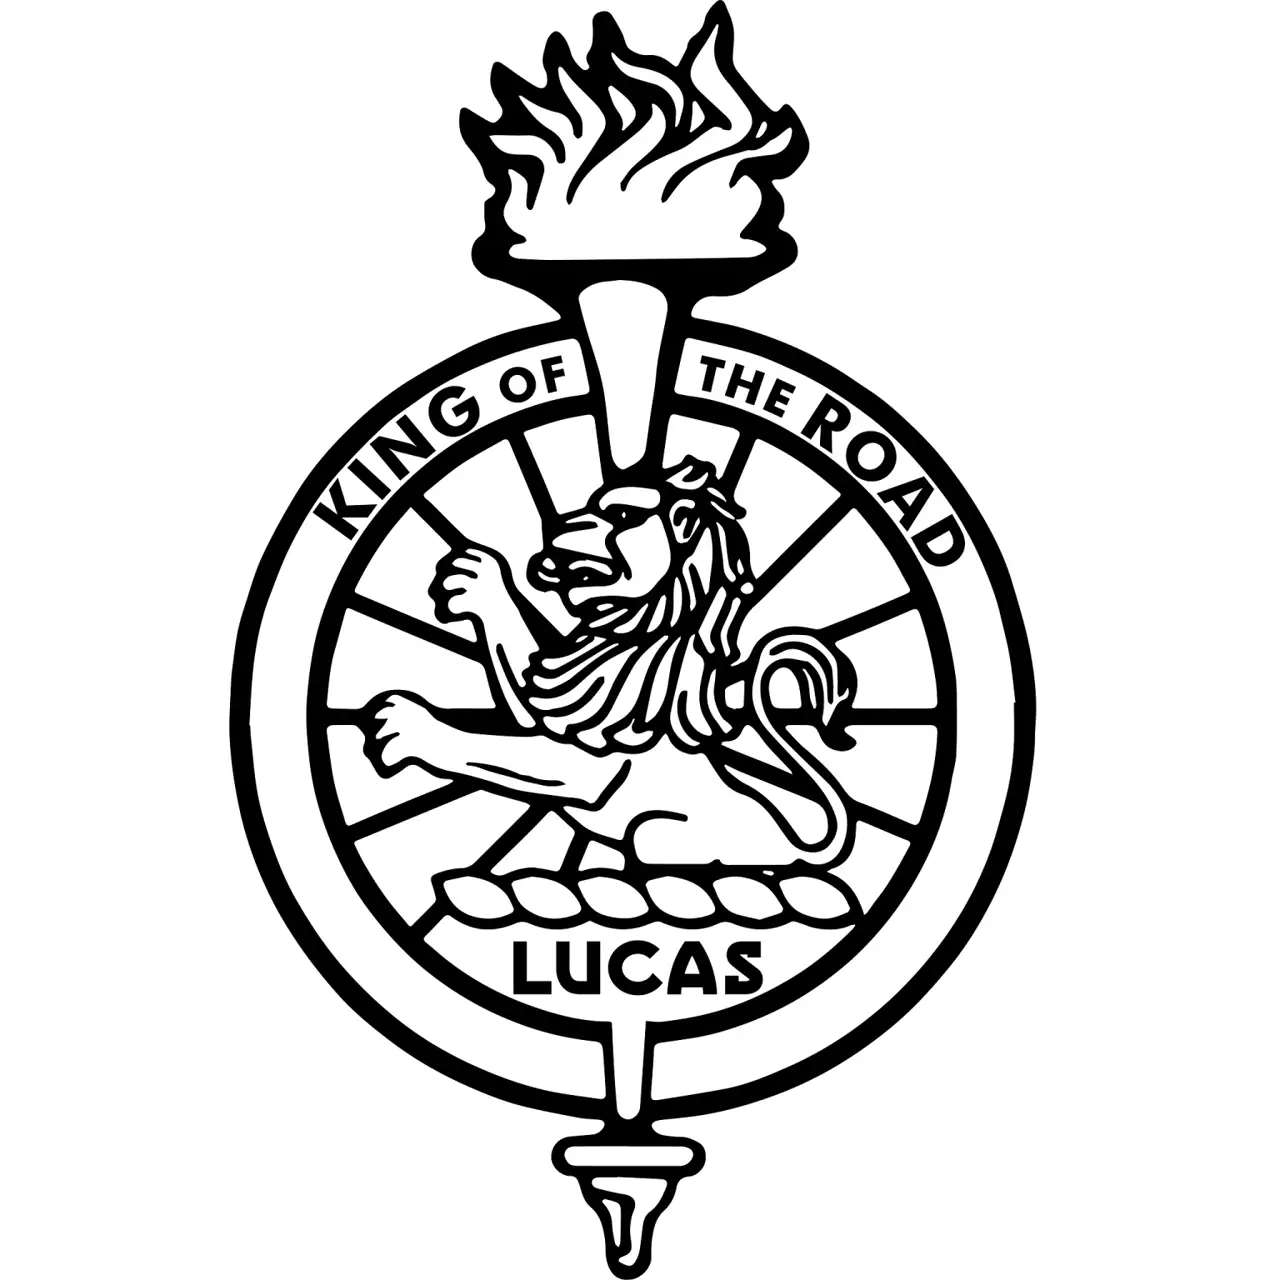 Lucas "King of the Road" Logo